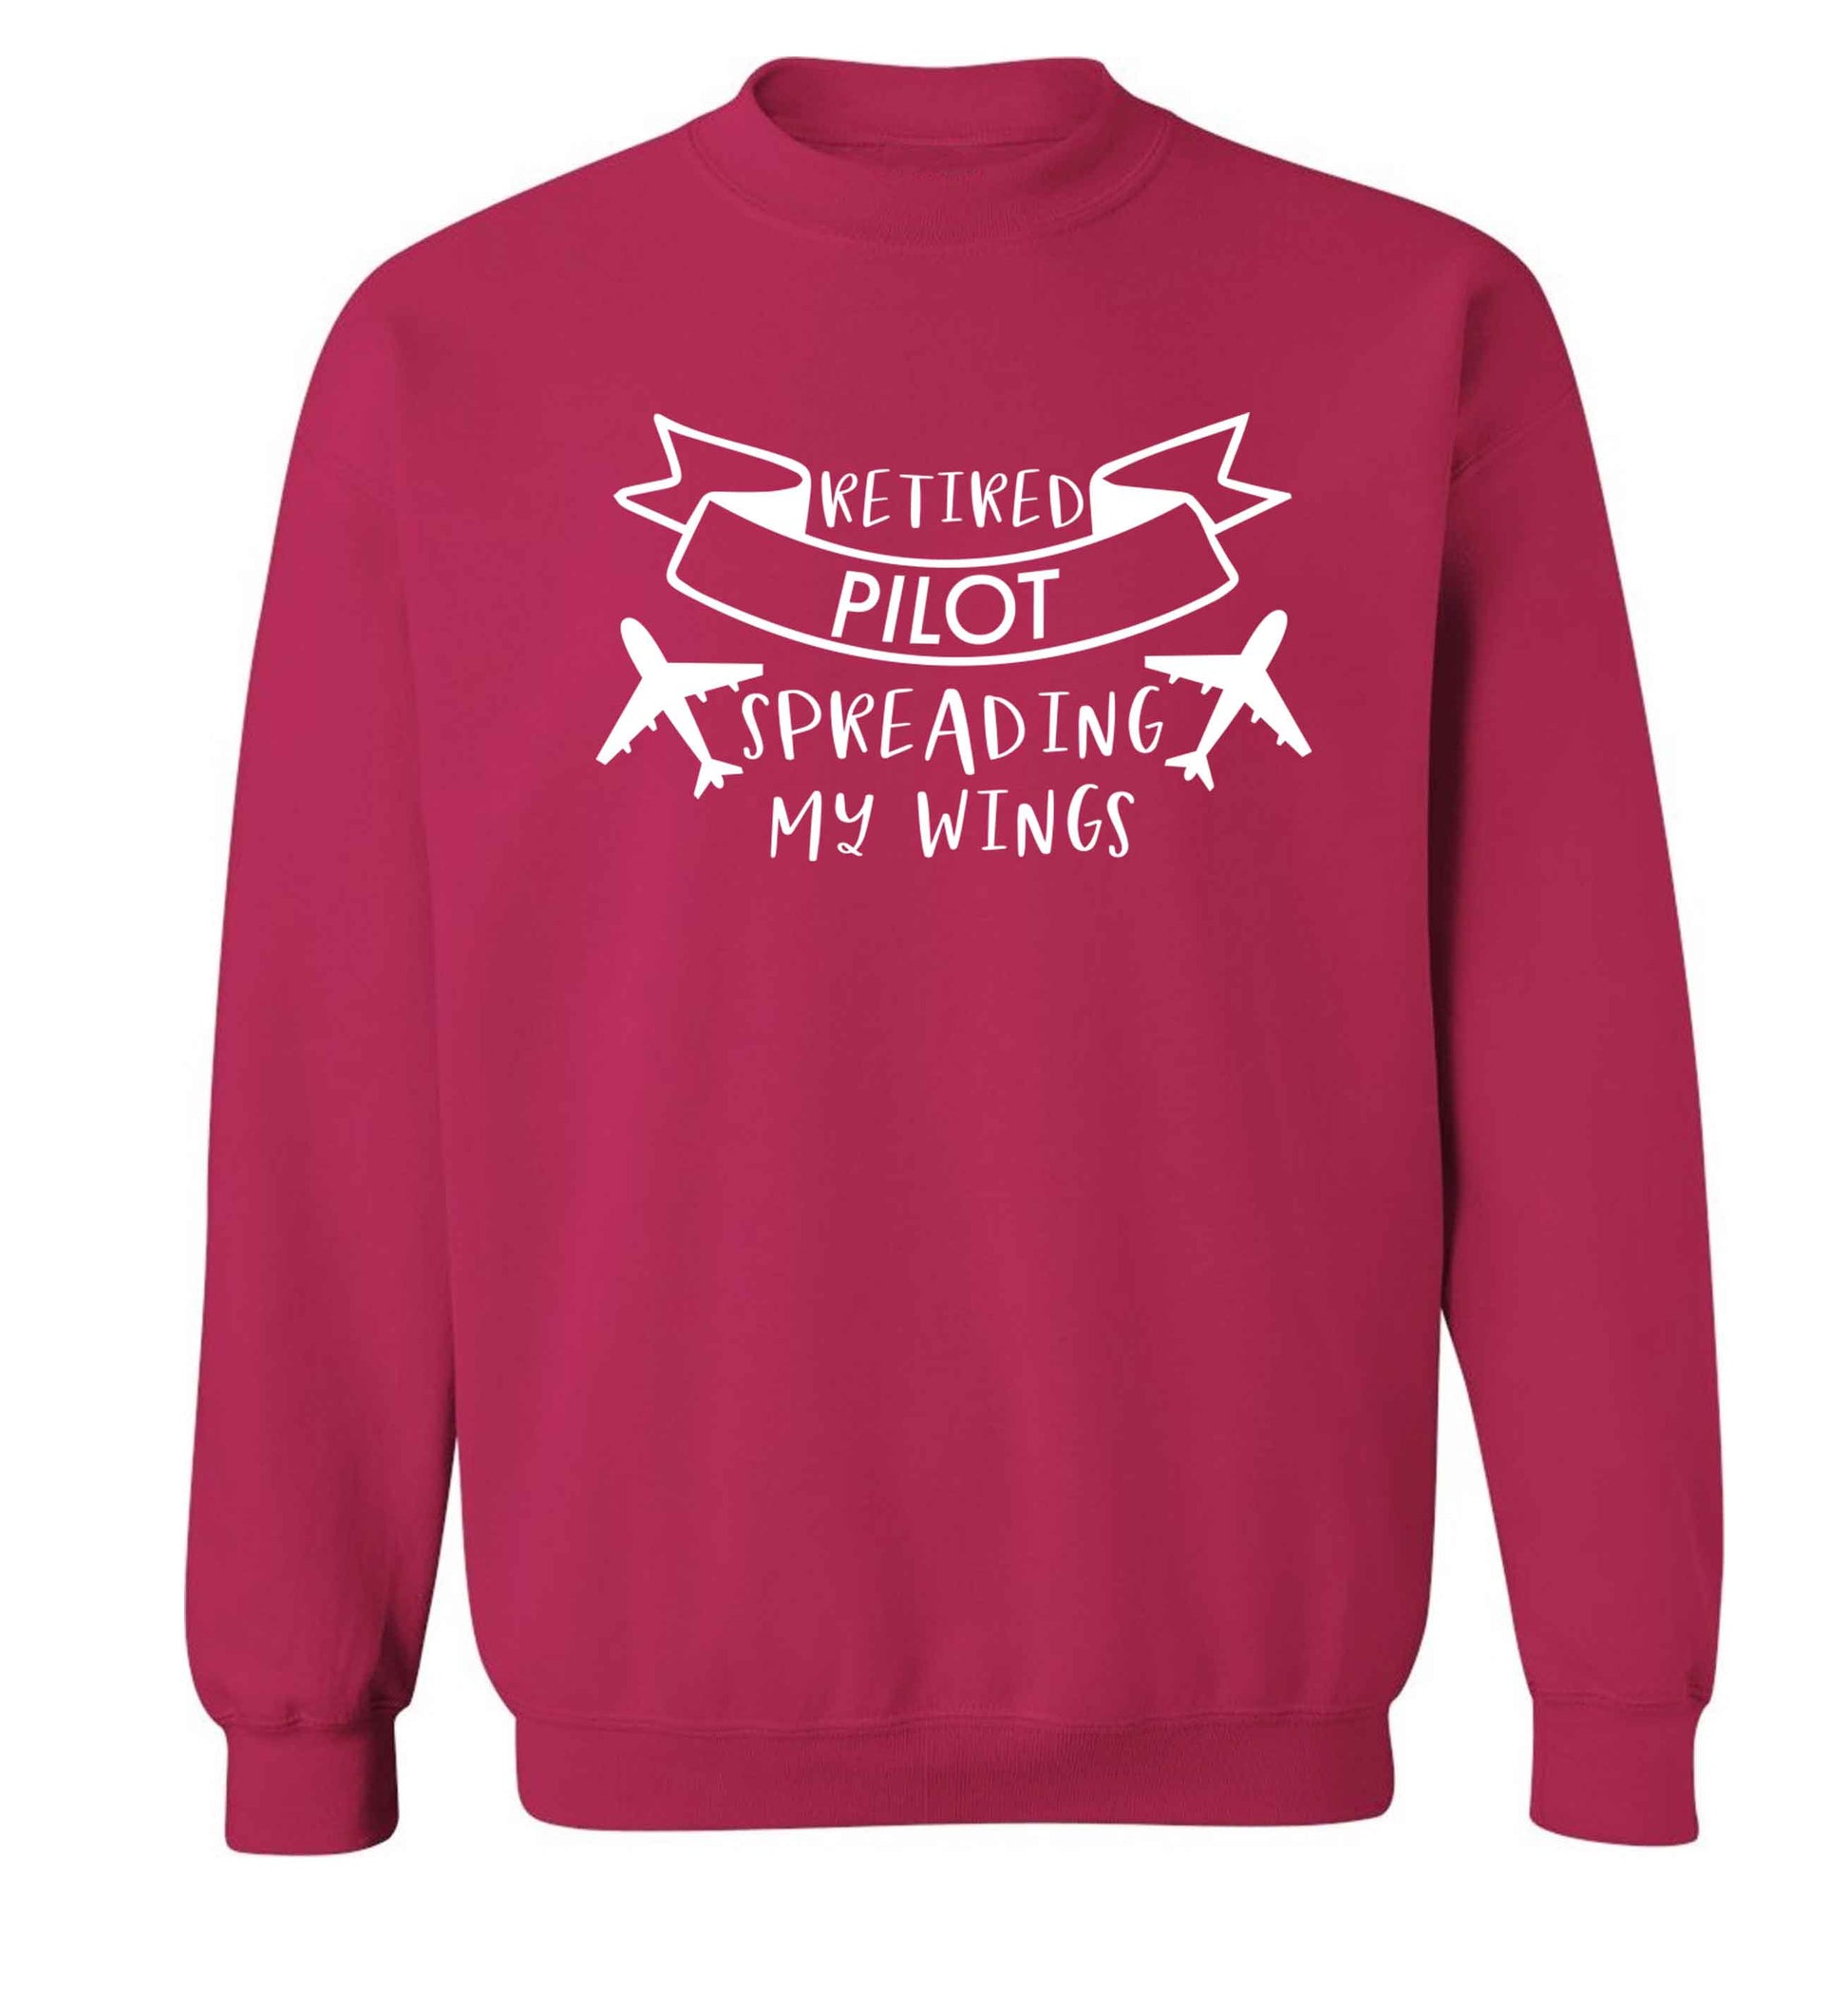 Retired pilot spreading my wings Adult's unisex pink Sweater 2XL